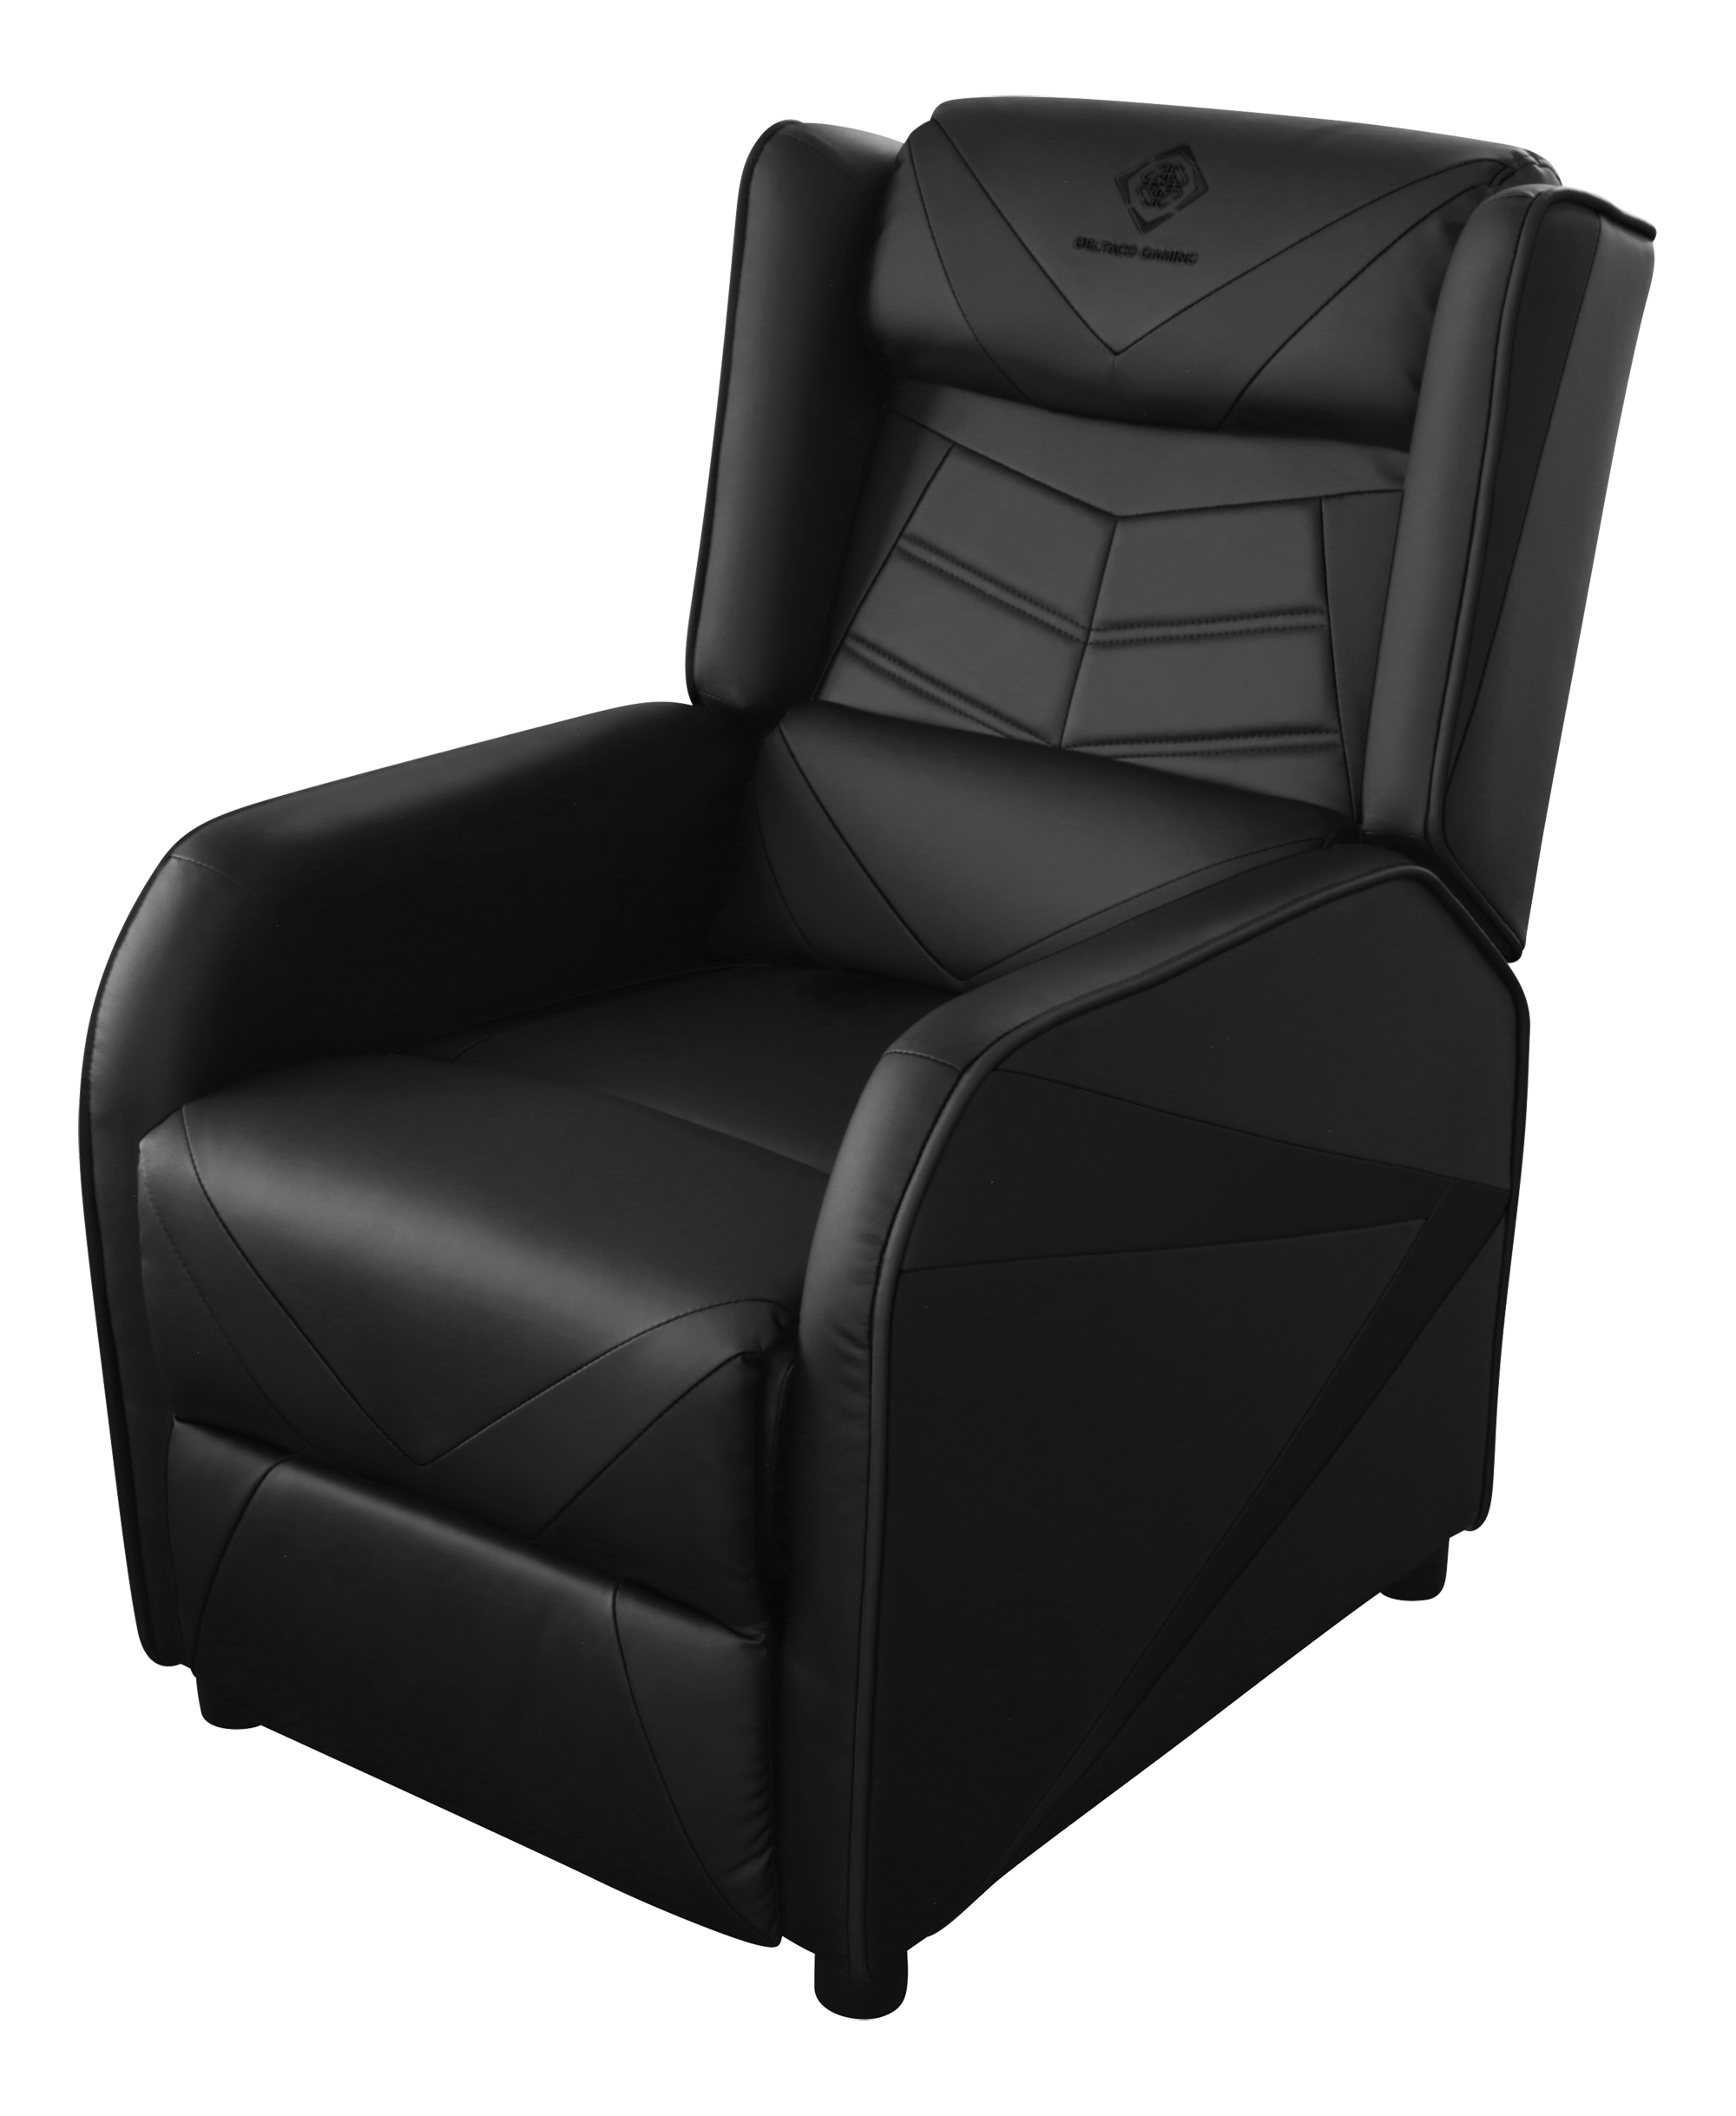 Armchair DELTACO GAMING artificial leather, recliner, 49cm wide seat cushion, black / GAM-087-B